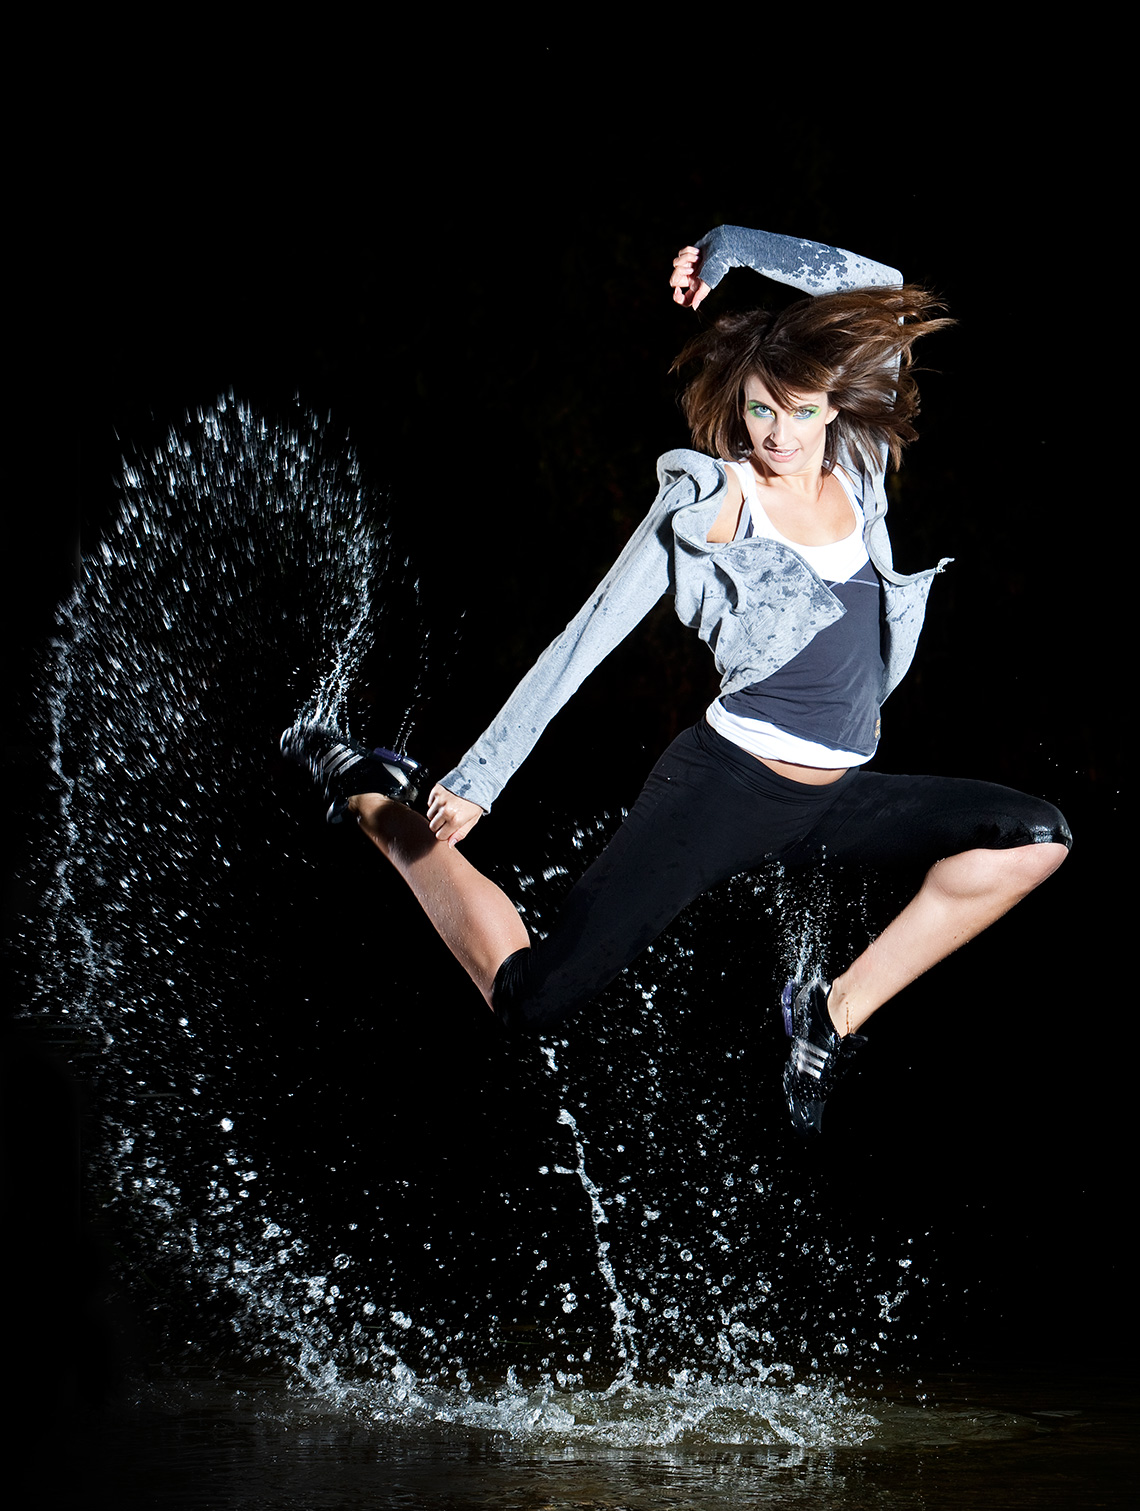 Editorial photographer of a contemporary dancer leaping from water.